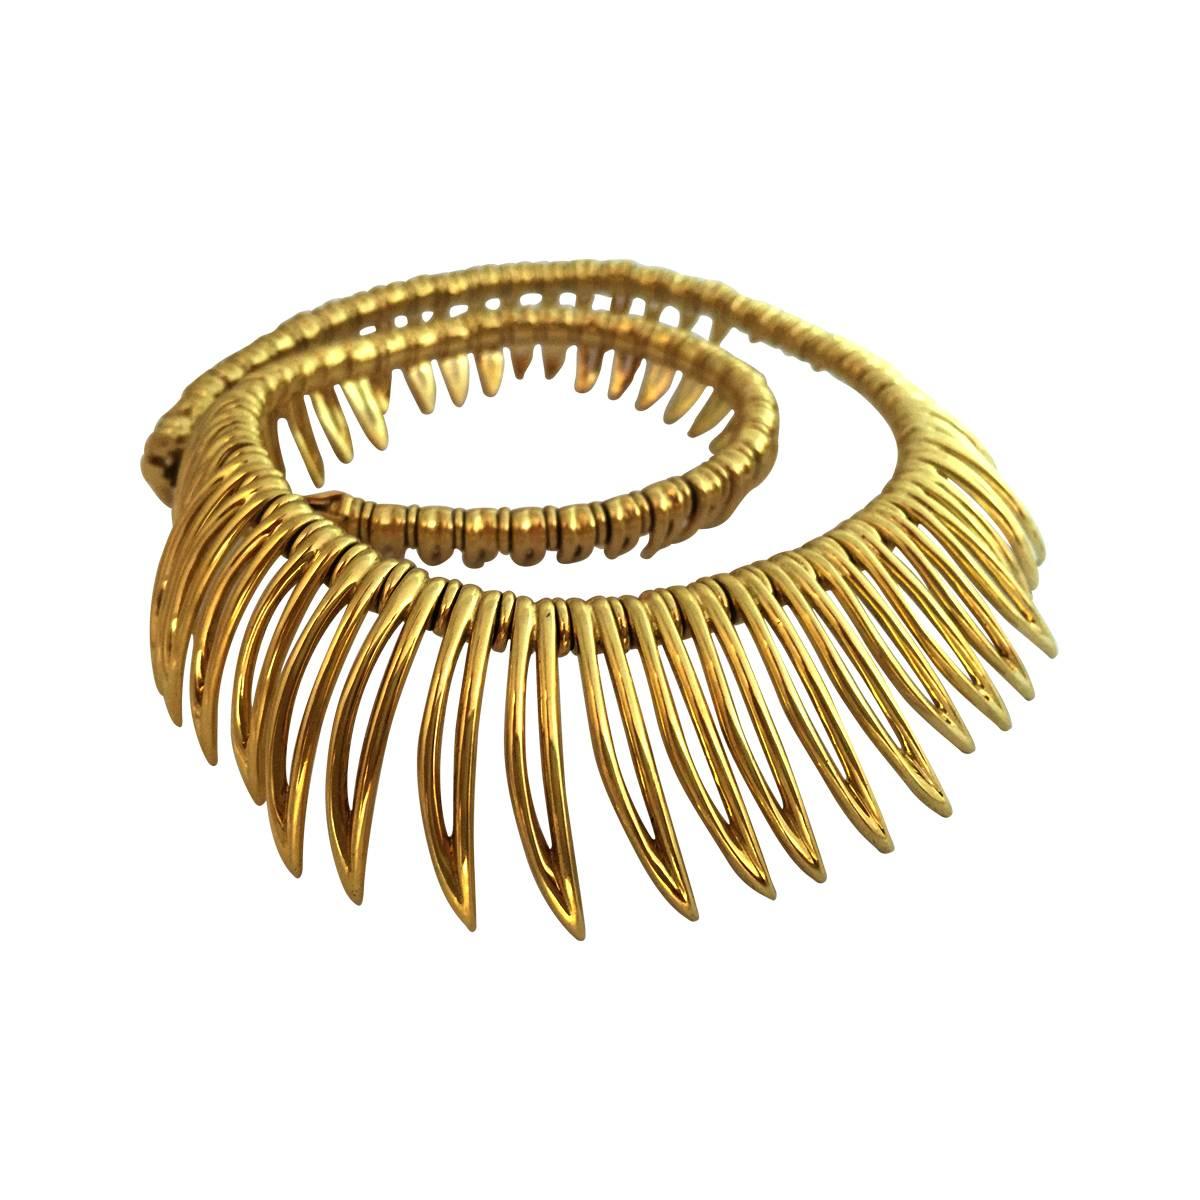 A 750/000 yellow gold necklace signed by Mauboussin made with articulated fringes. 
Length: 395 mm. 
Weight: 120,8 grams. 
Circa 1950/1960